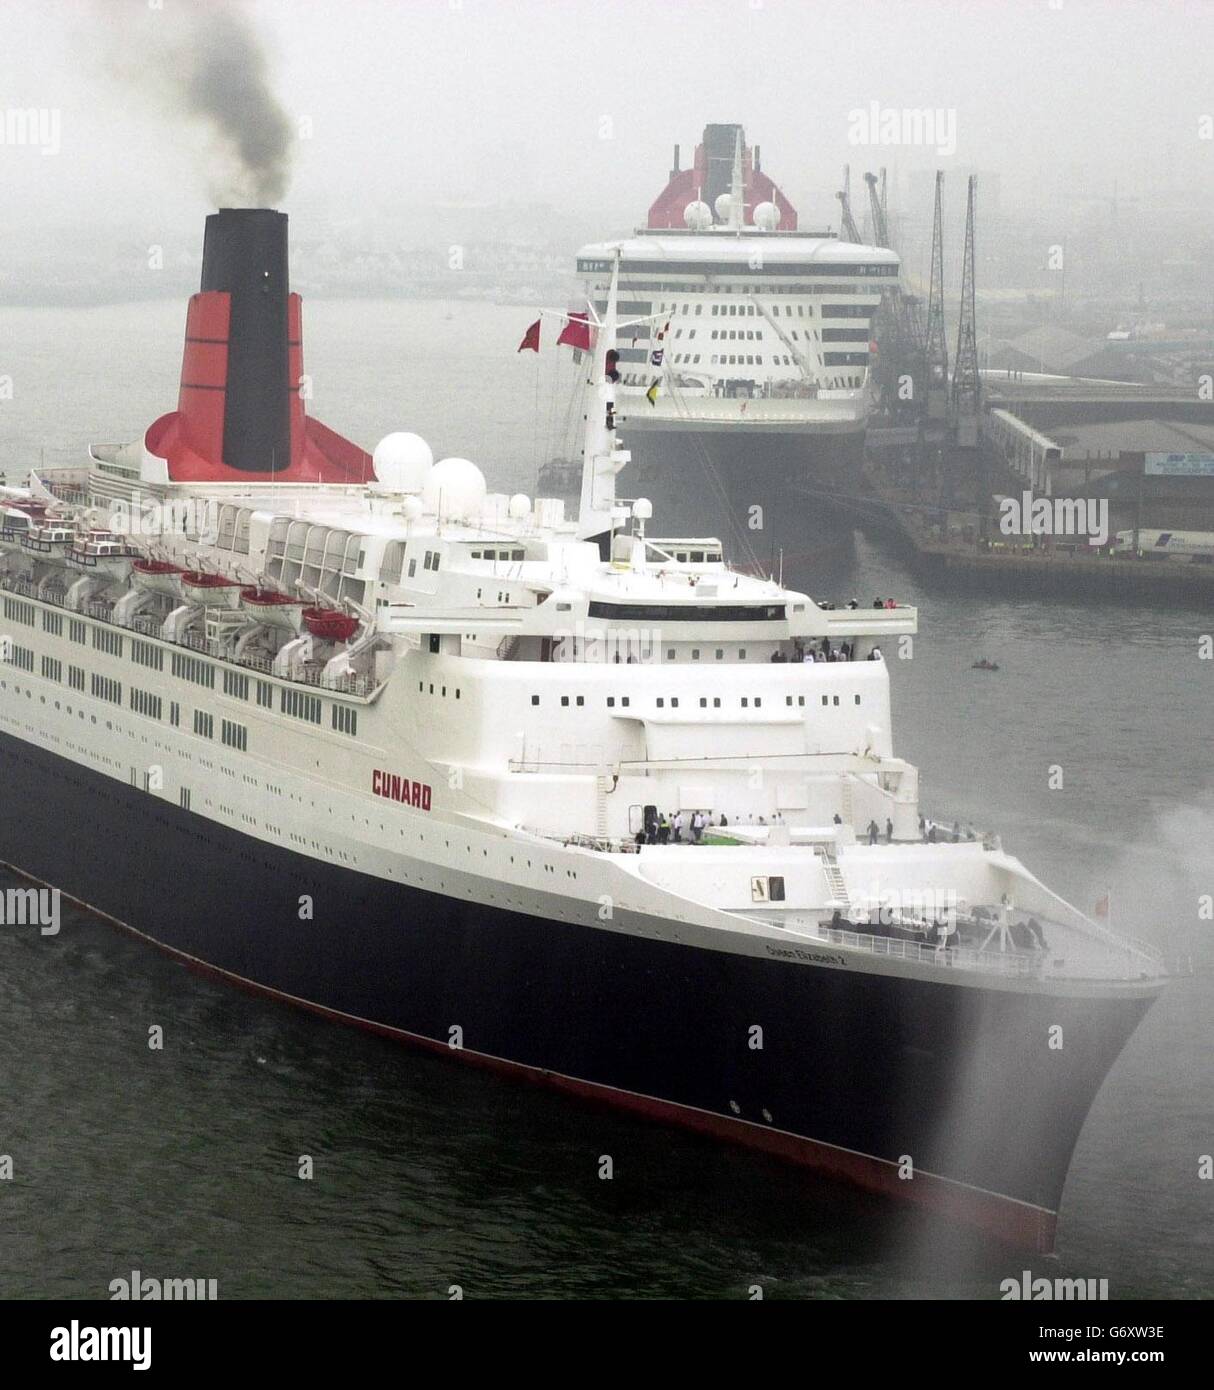 The QE2 passing the QM2 at Southampton. The end of an era in cruising was being marked today in a ceremony involving the QE2 and Cunard's new superliner the 150,000-tonne Queen Mary 2 (QM2). At the ceremony, attended by Deputy Prime Minister John Prescott, Cunard's flagship status was being passed from the 35-year-old QE2 to the 540 million QM2 which was officially named by the Queen in January this year. Stock Photo